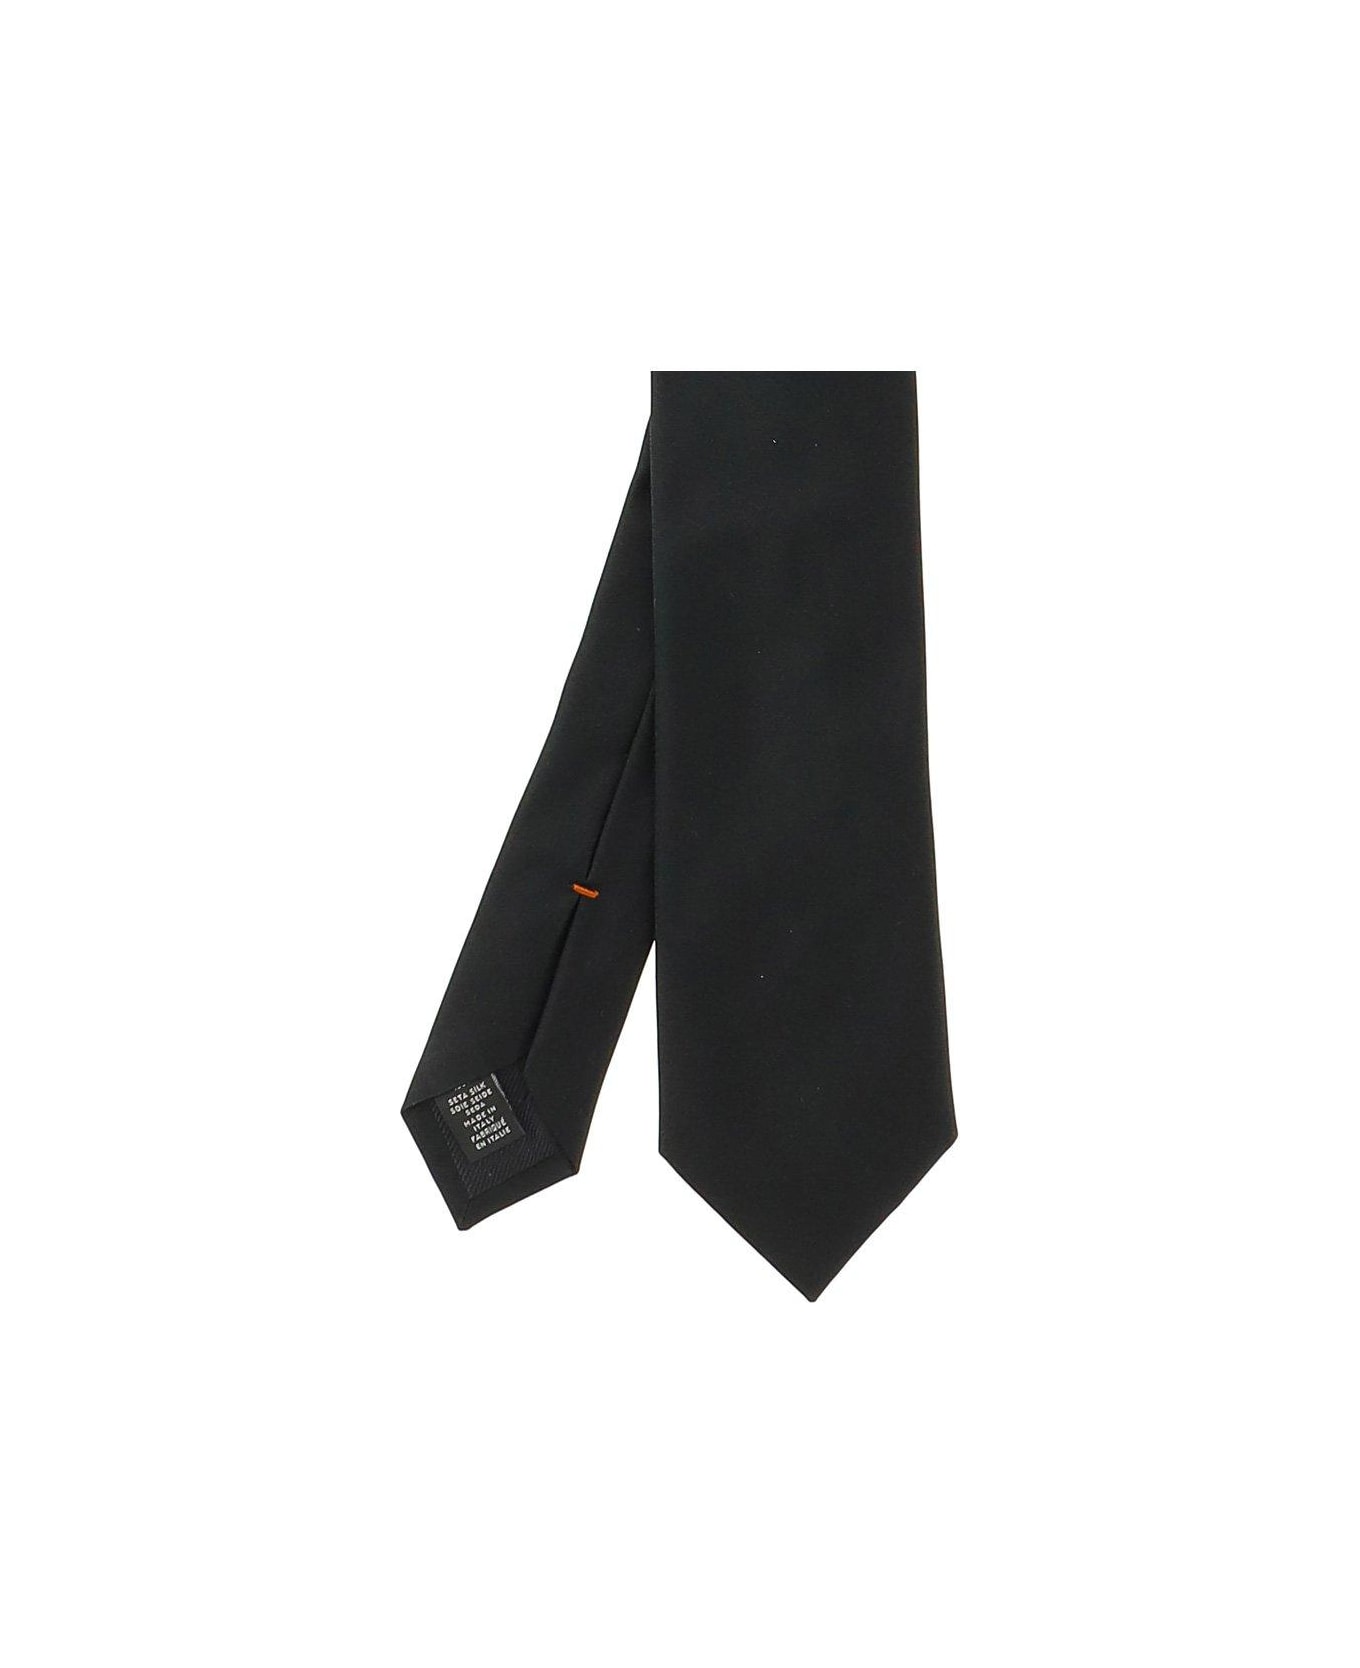 Zegna Pointed Tie